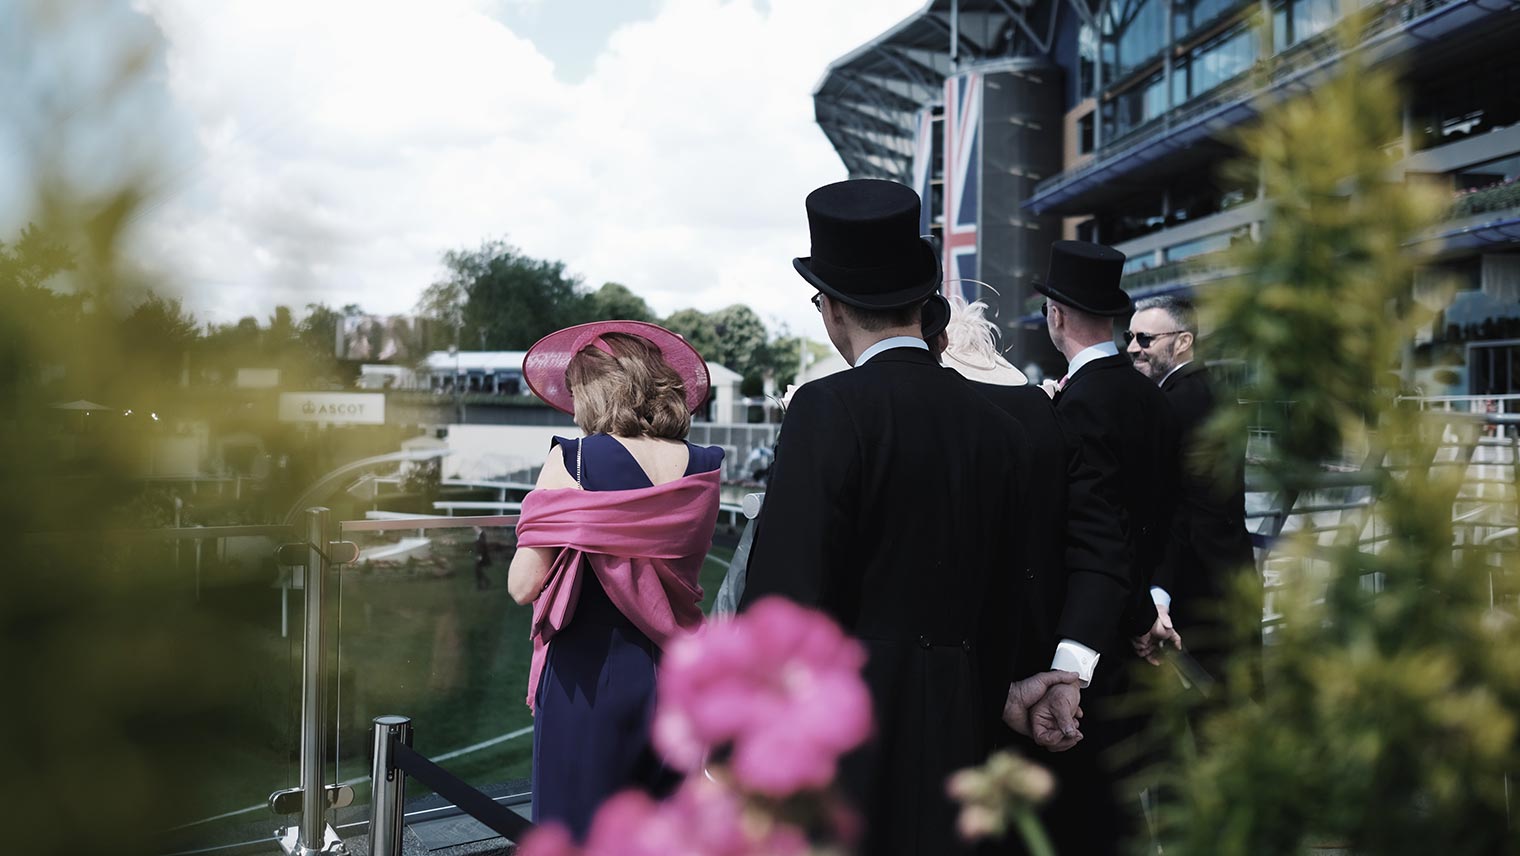 Attendees dressed up at Ascot Racecourse